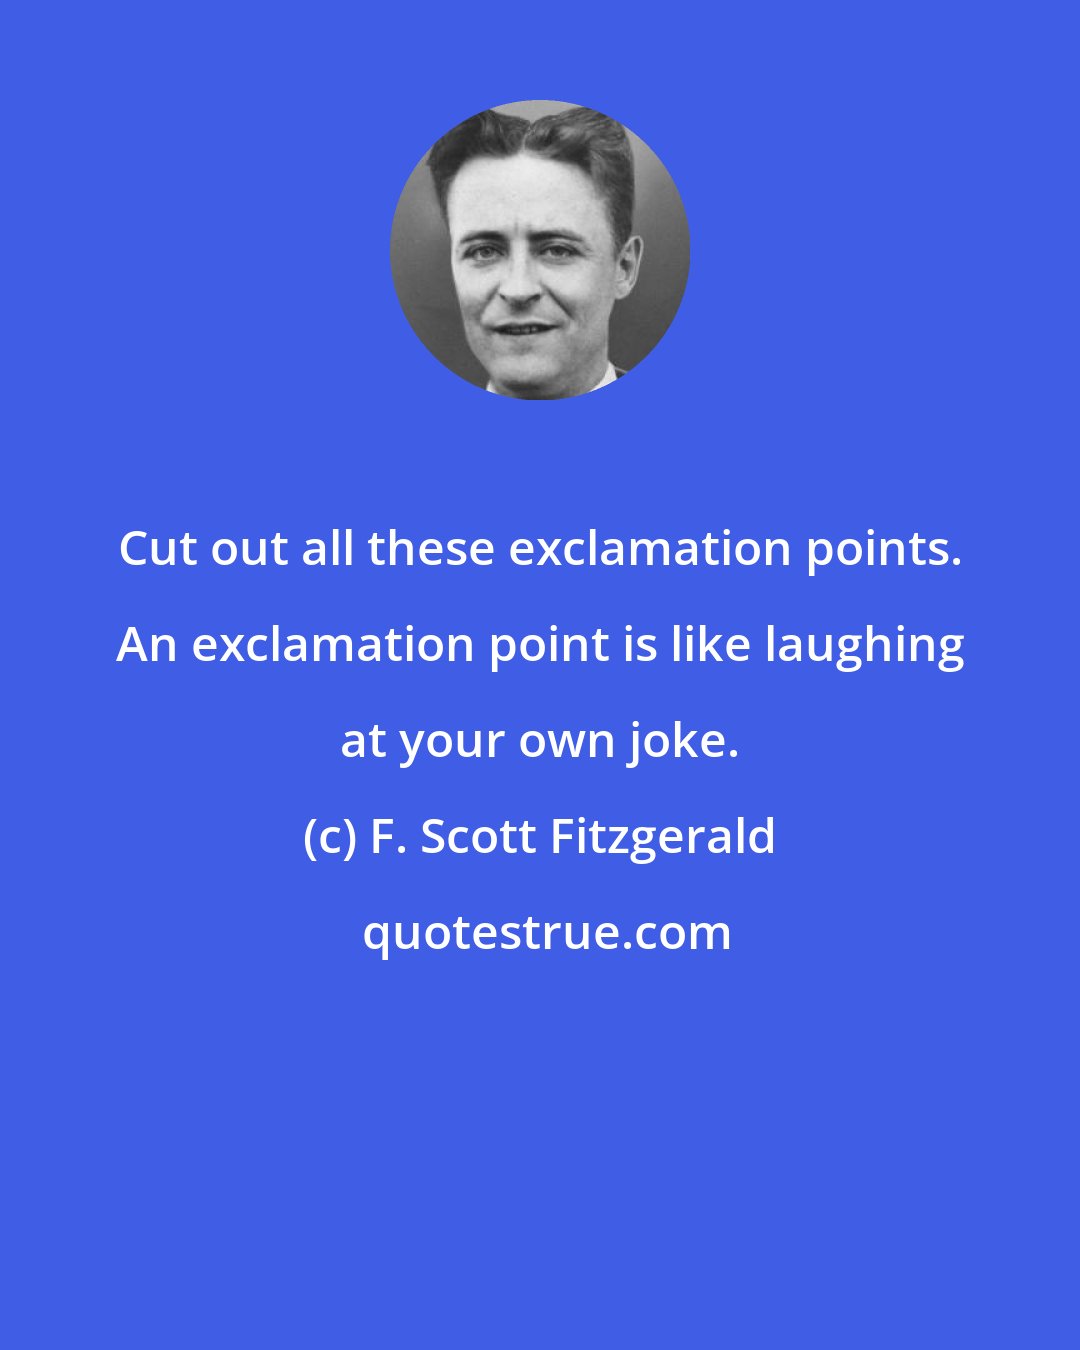 F. Scott Fitzgerald: Cut out all these exclamation points. An exclamation point is like laughing at your own joke.